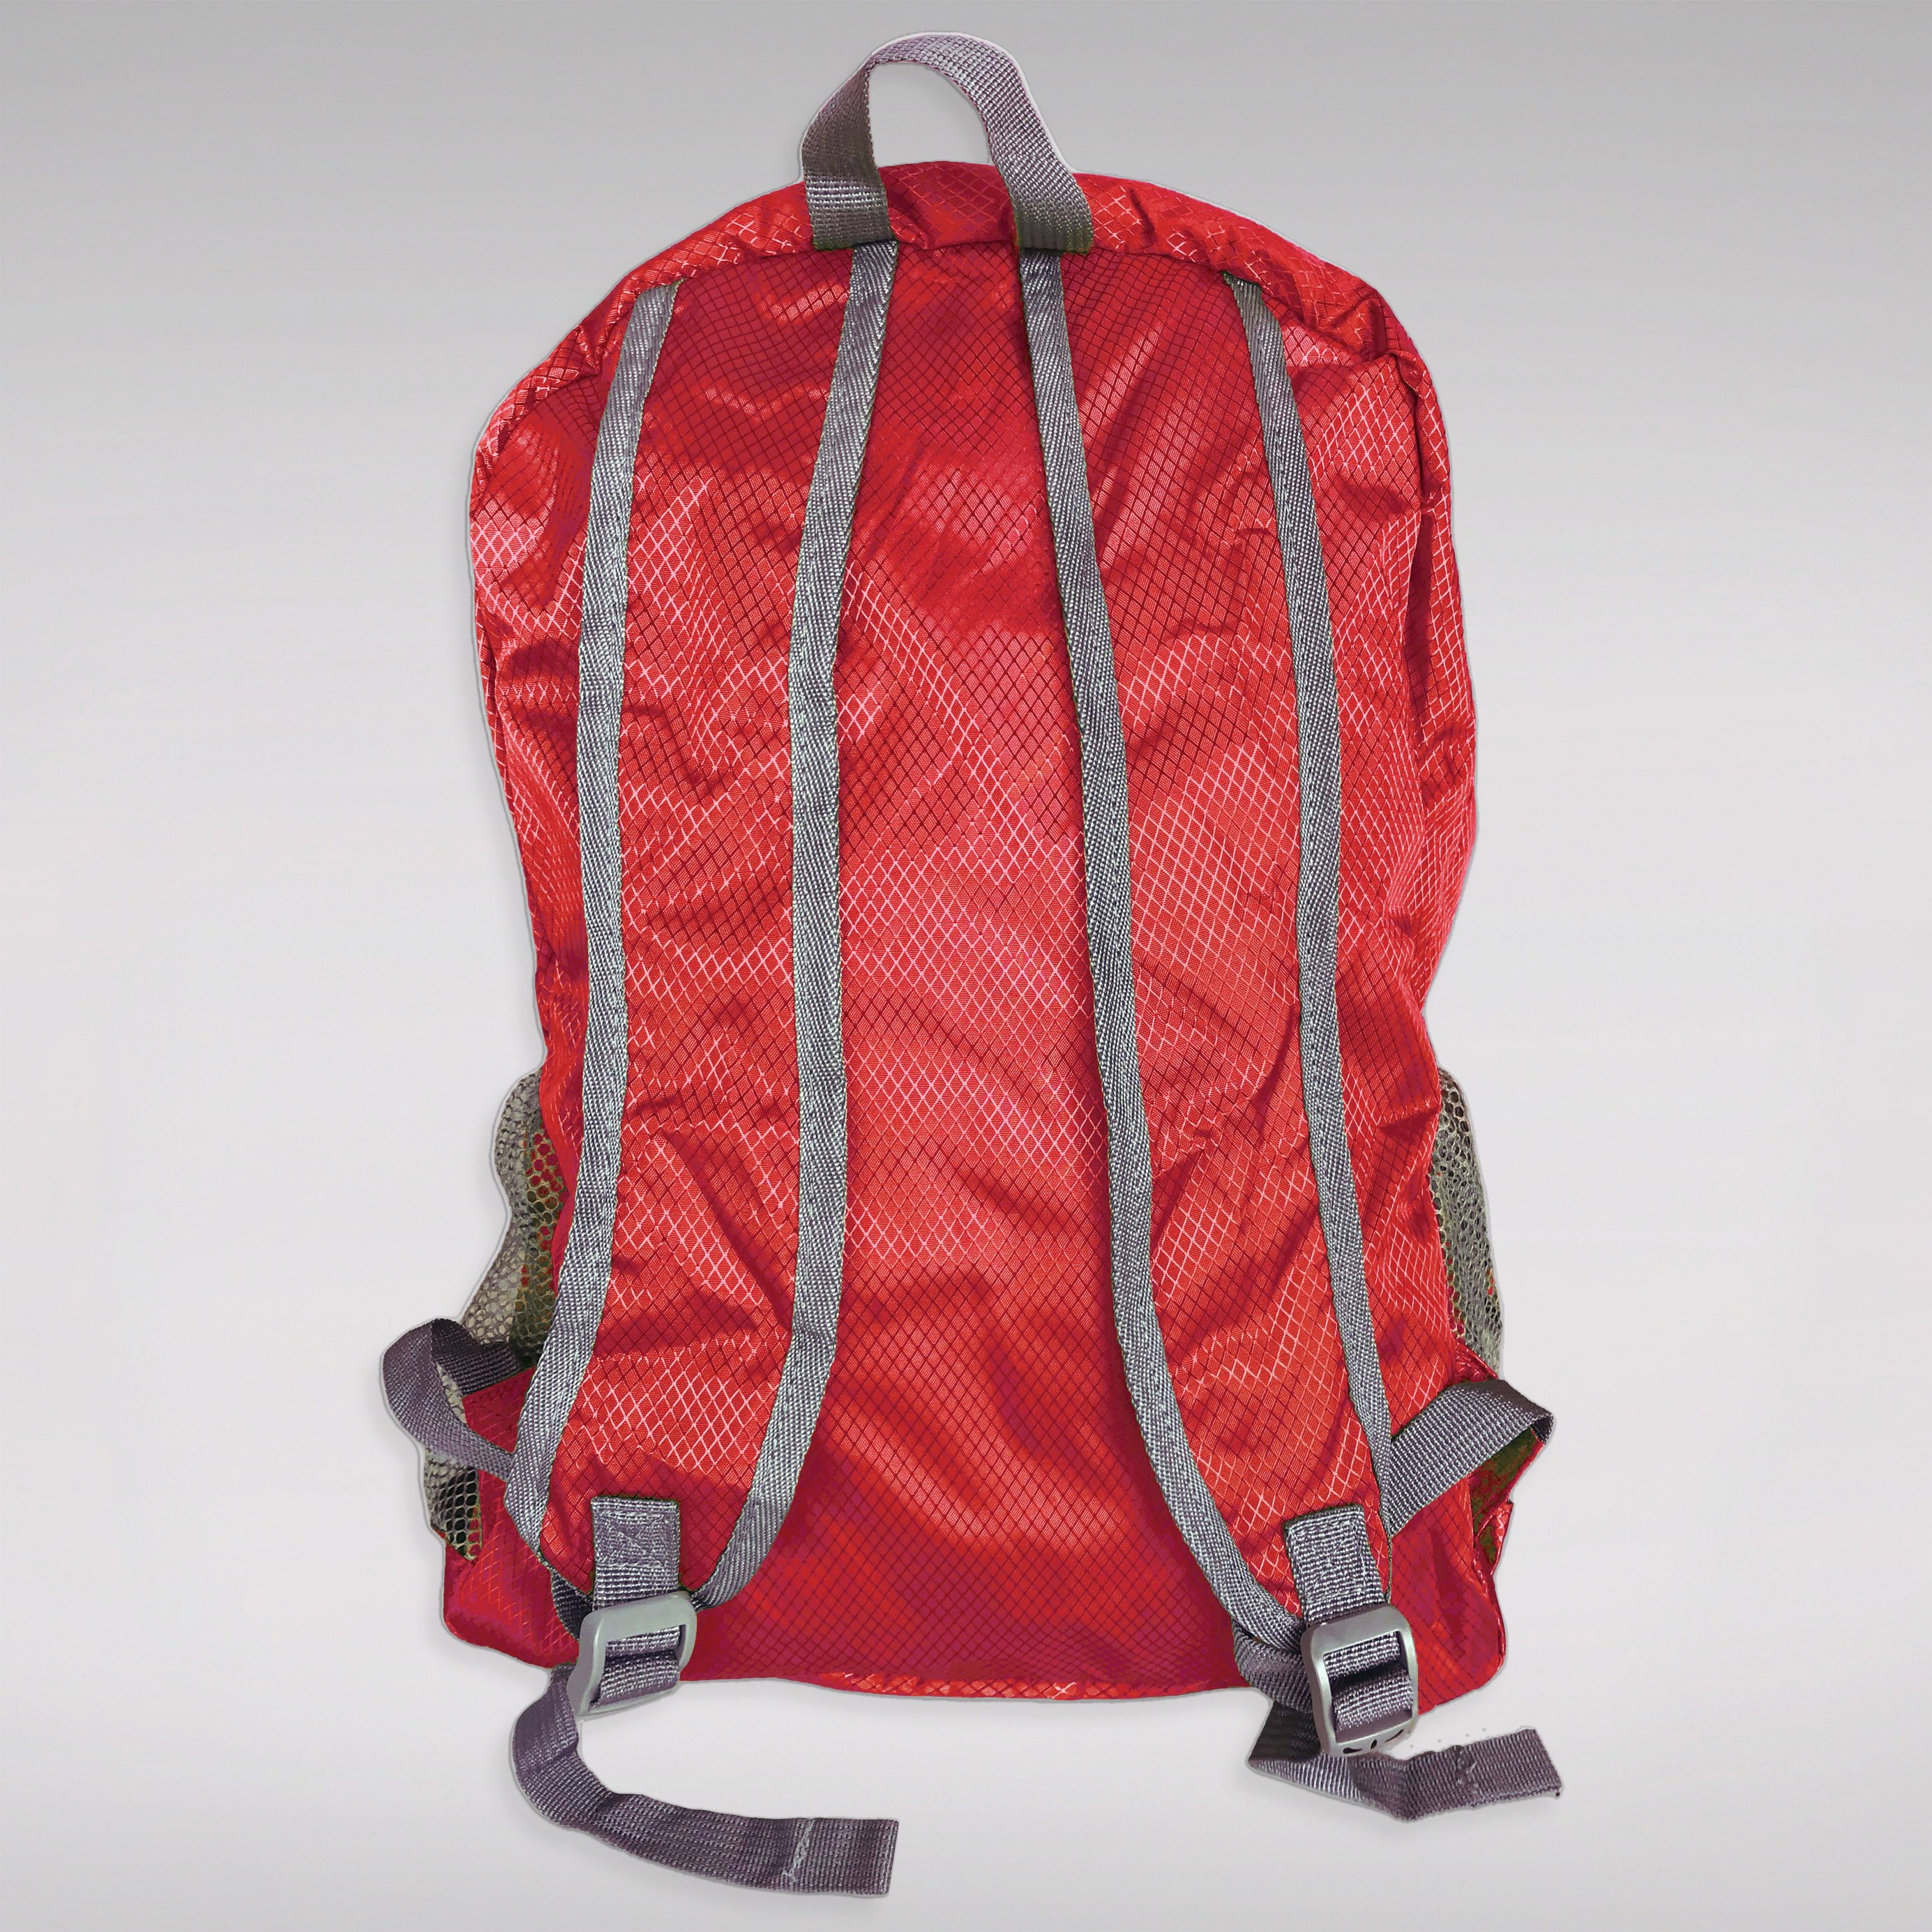 Wild Kiwi Packable Backpack - Red